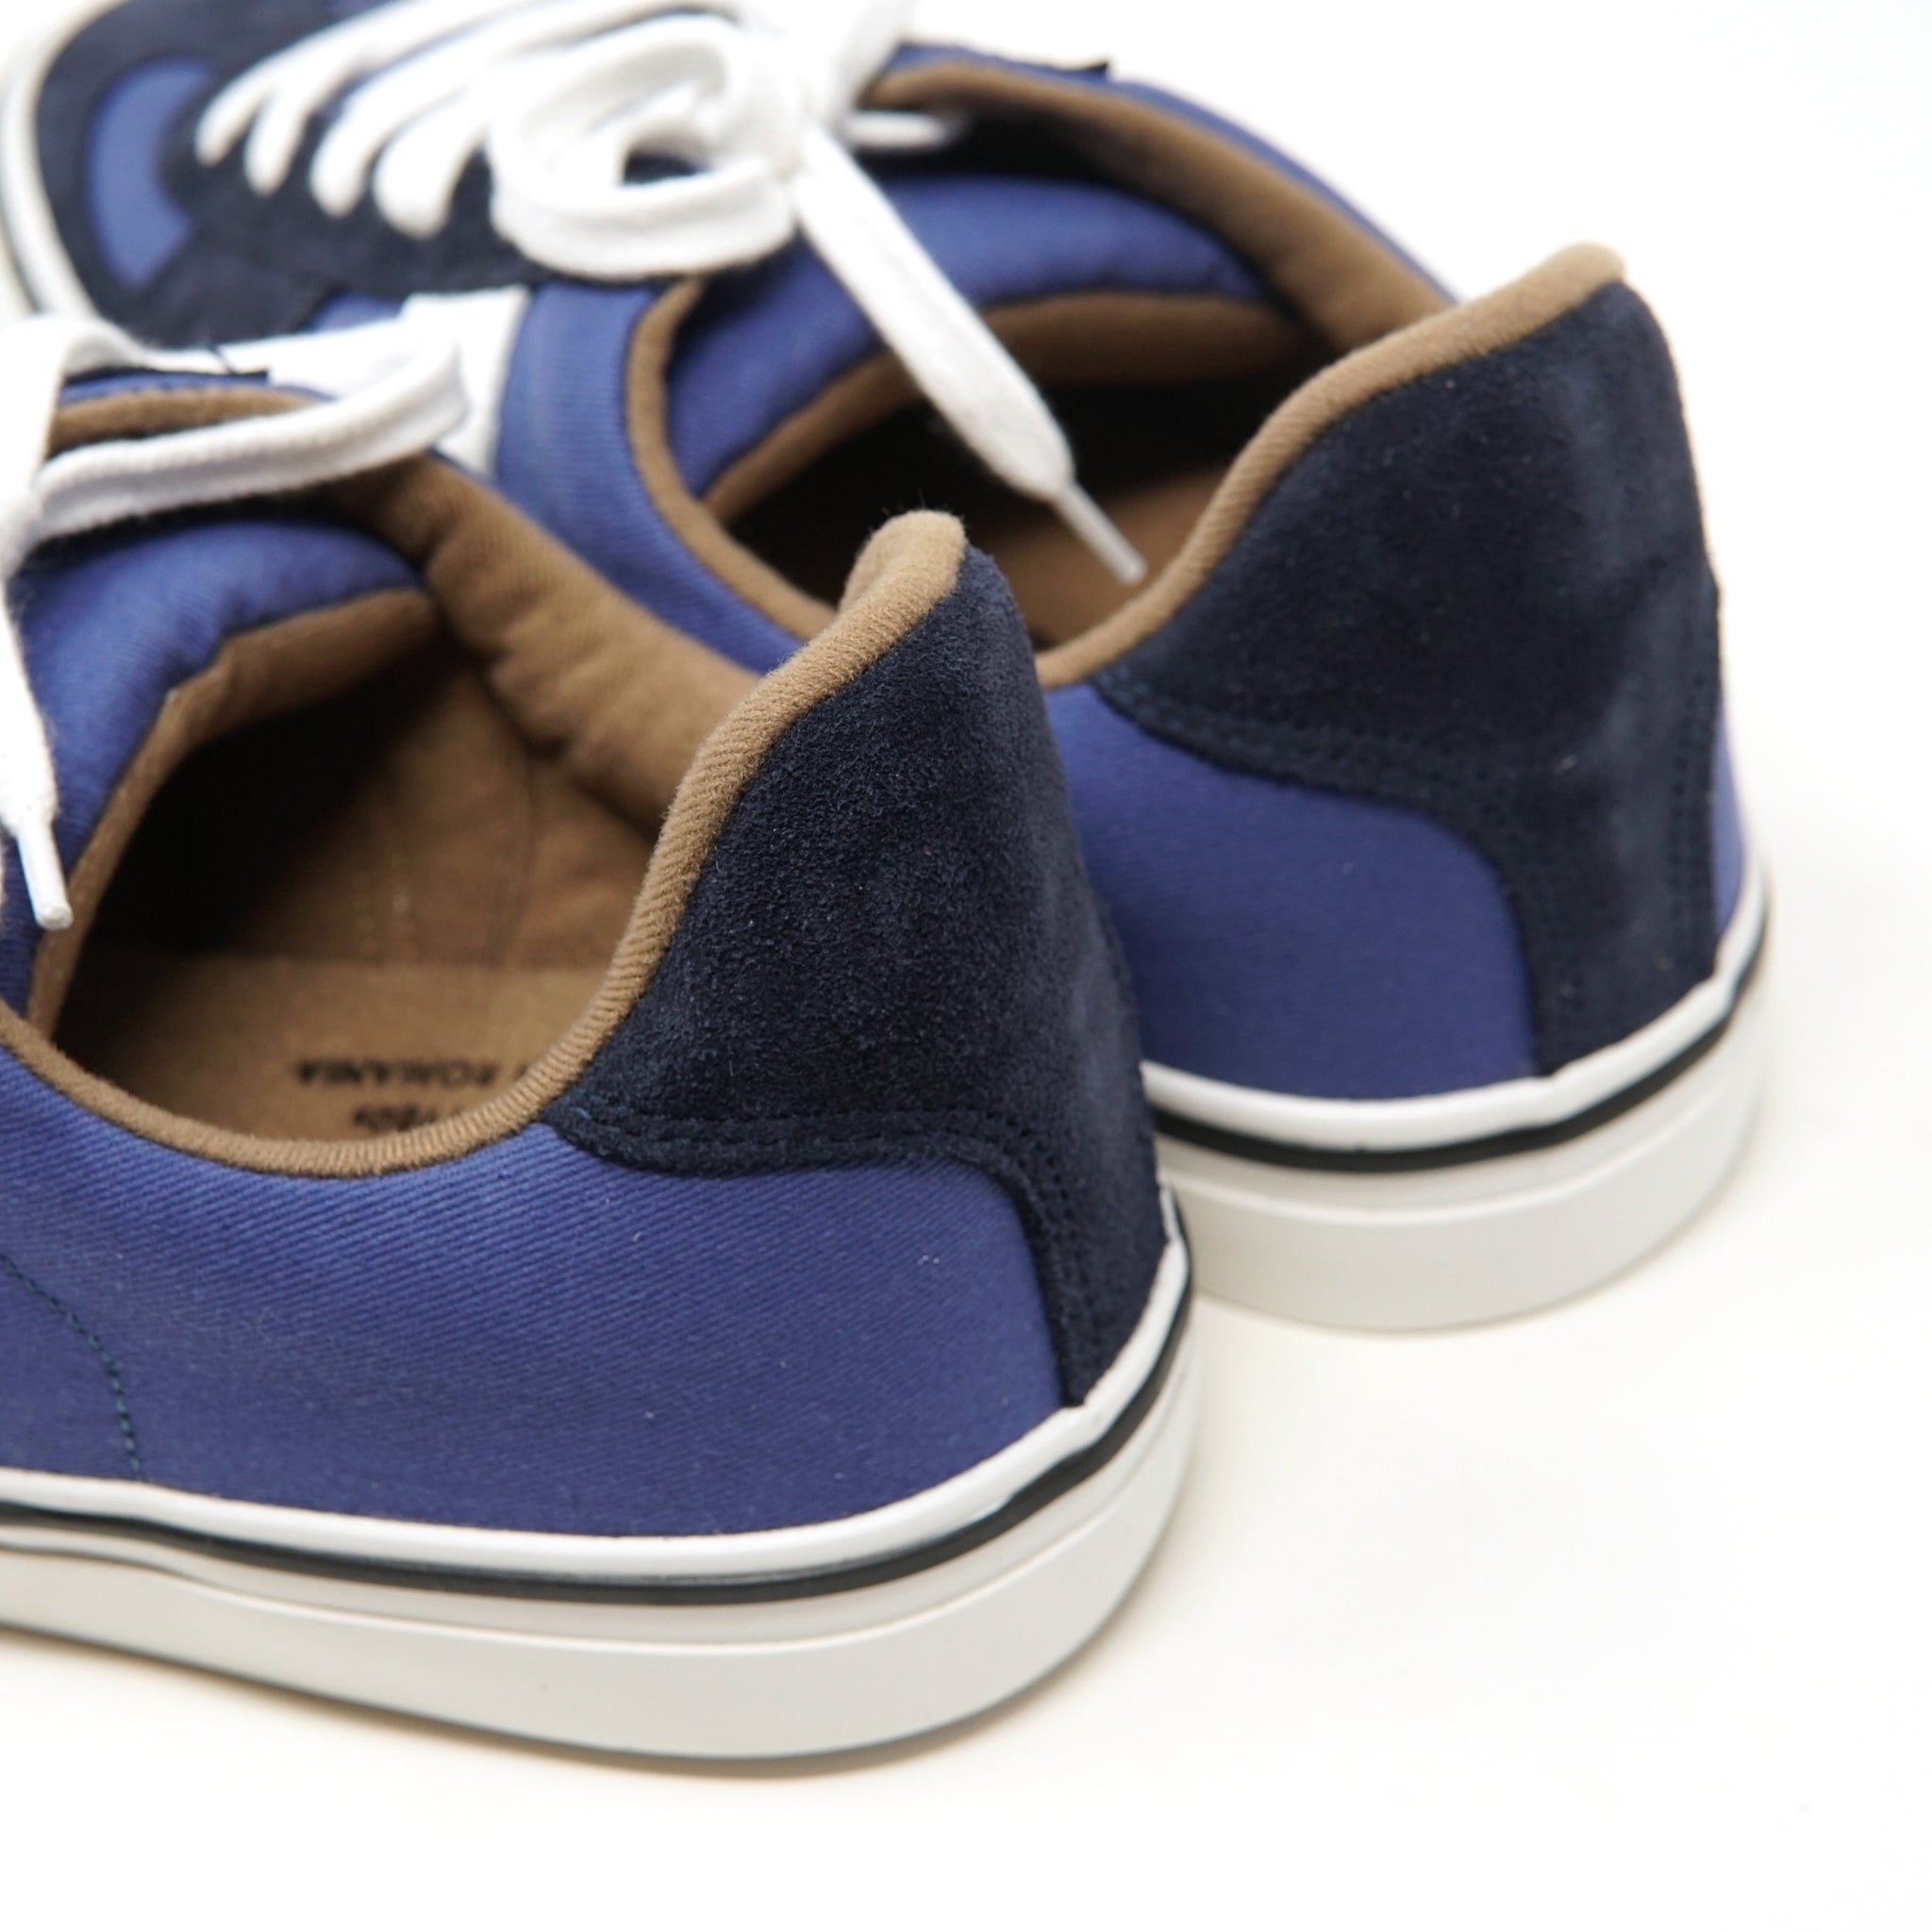 No:4700GFS | Name:German Military Trainer | Color:Navy-White【REPRODUCTION OF FOUND】